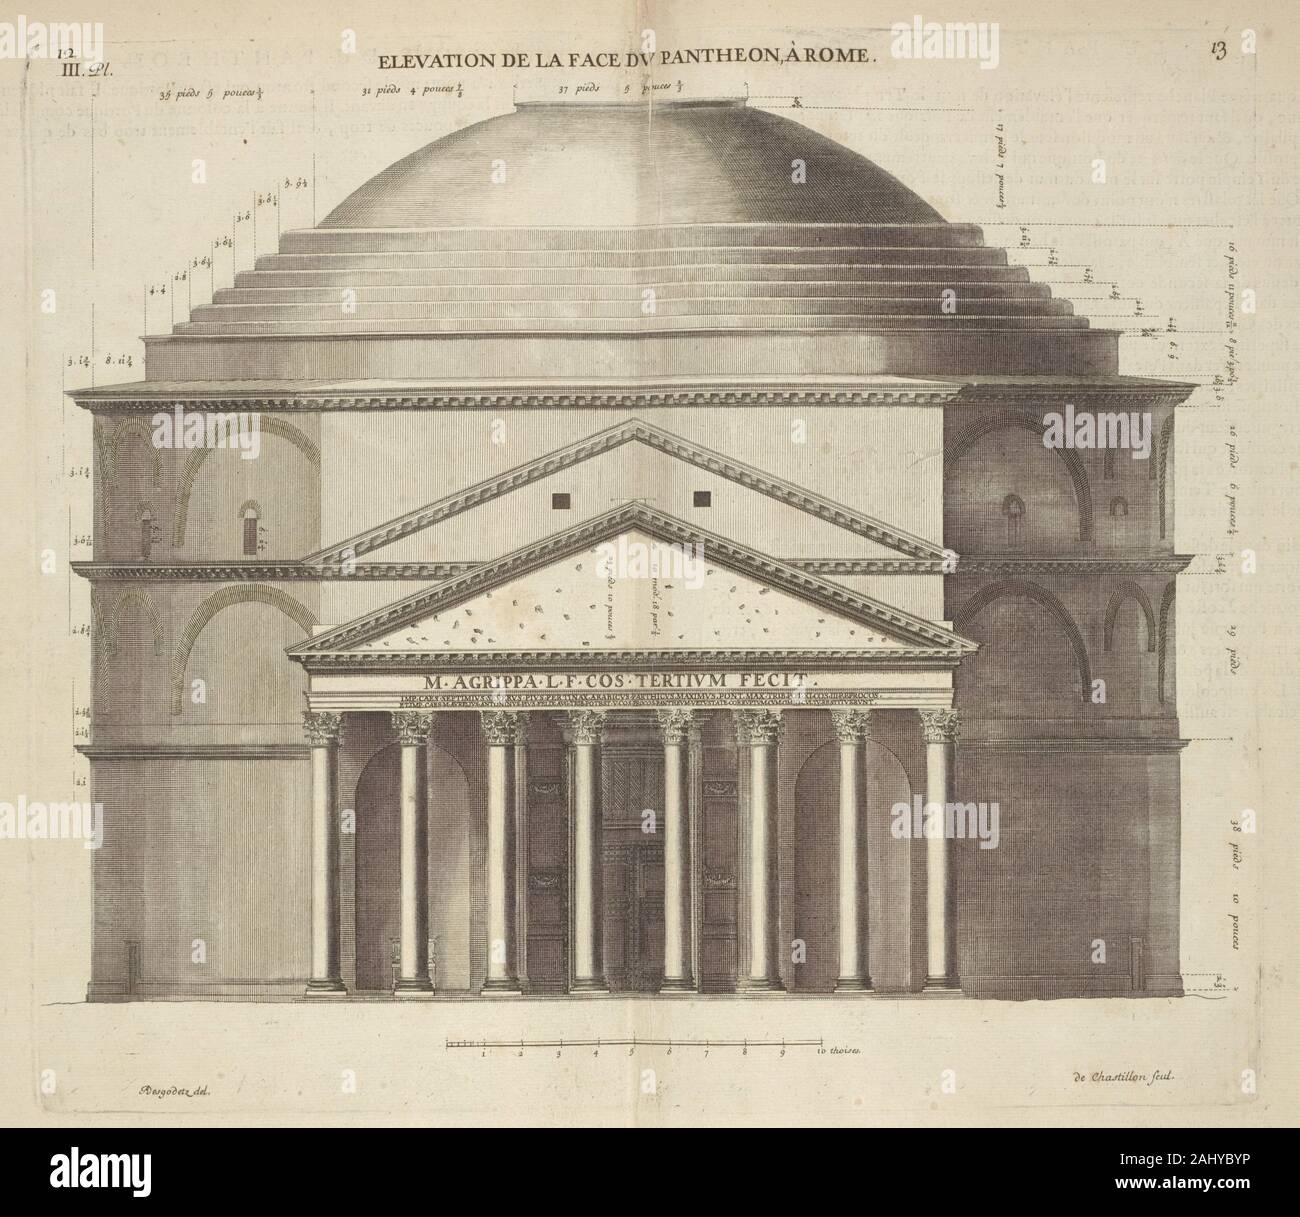 Elevation of the face of the Pantheon in Rome. Additional title